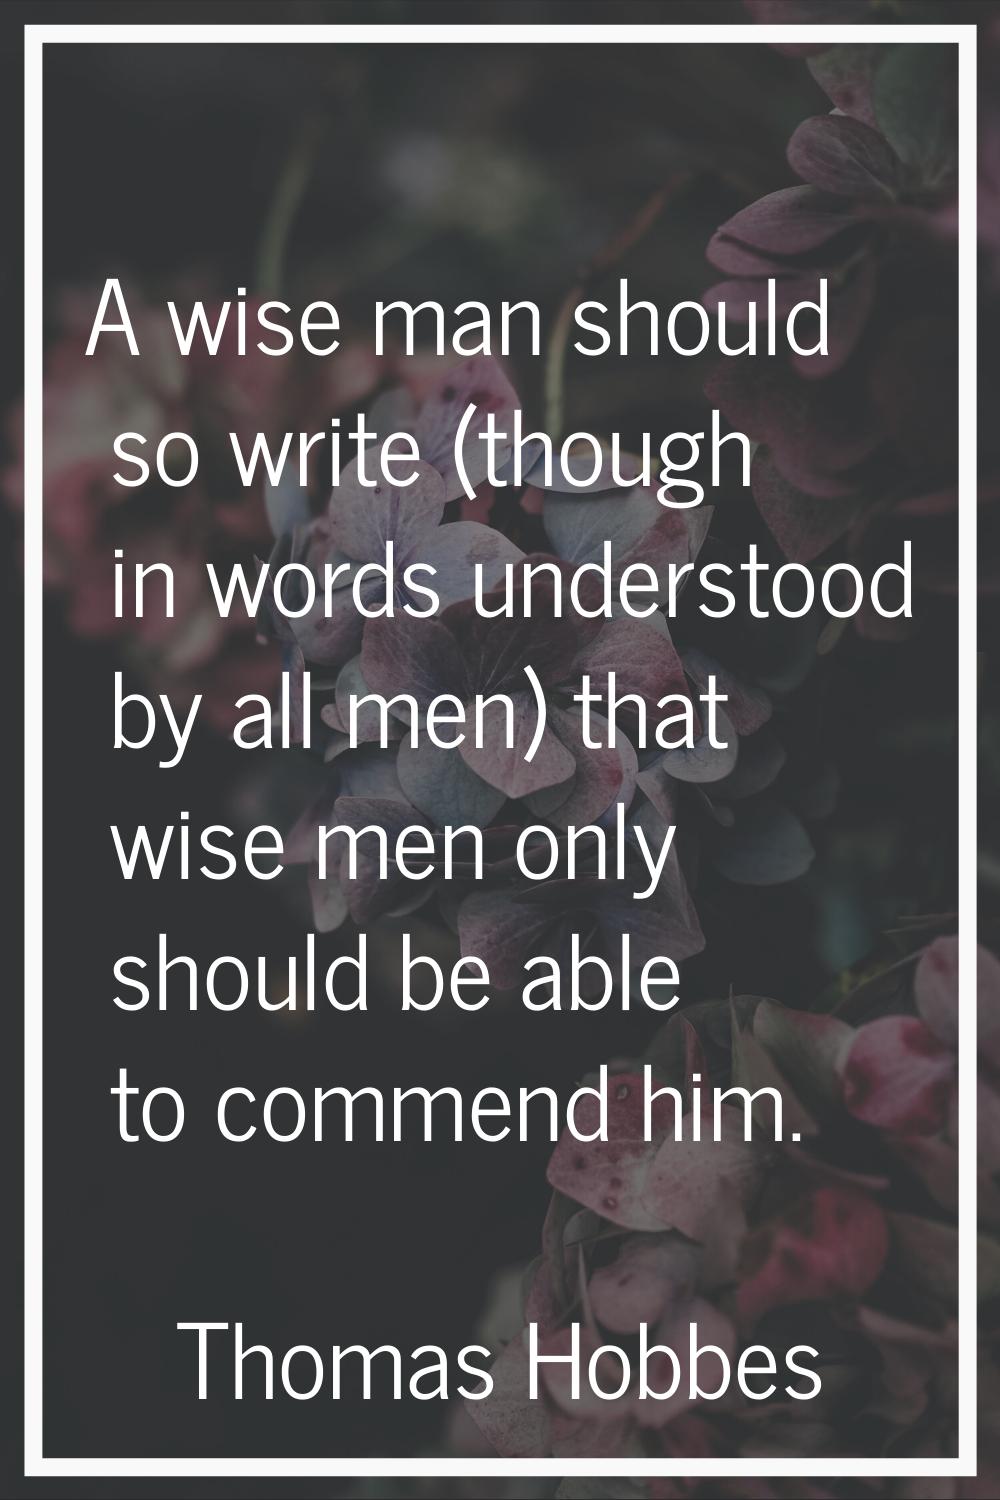 A wise man should so write (though in words understood by all men) that wise men only should be abl